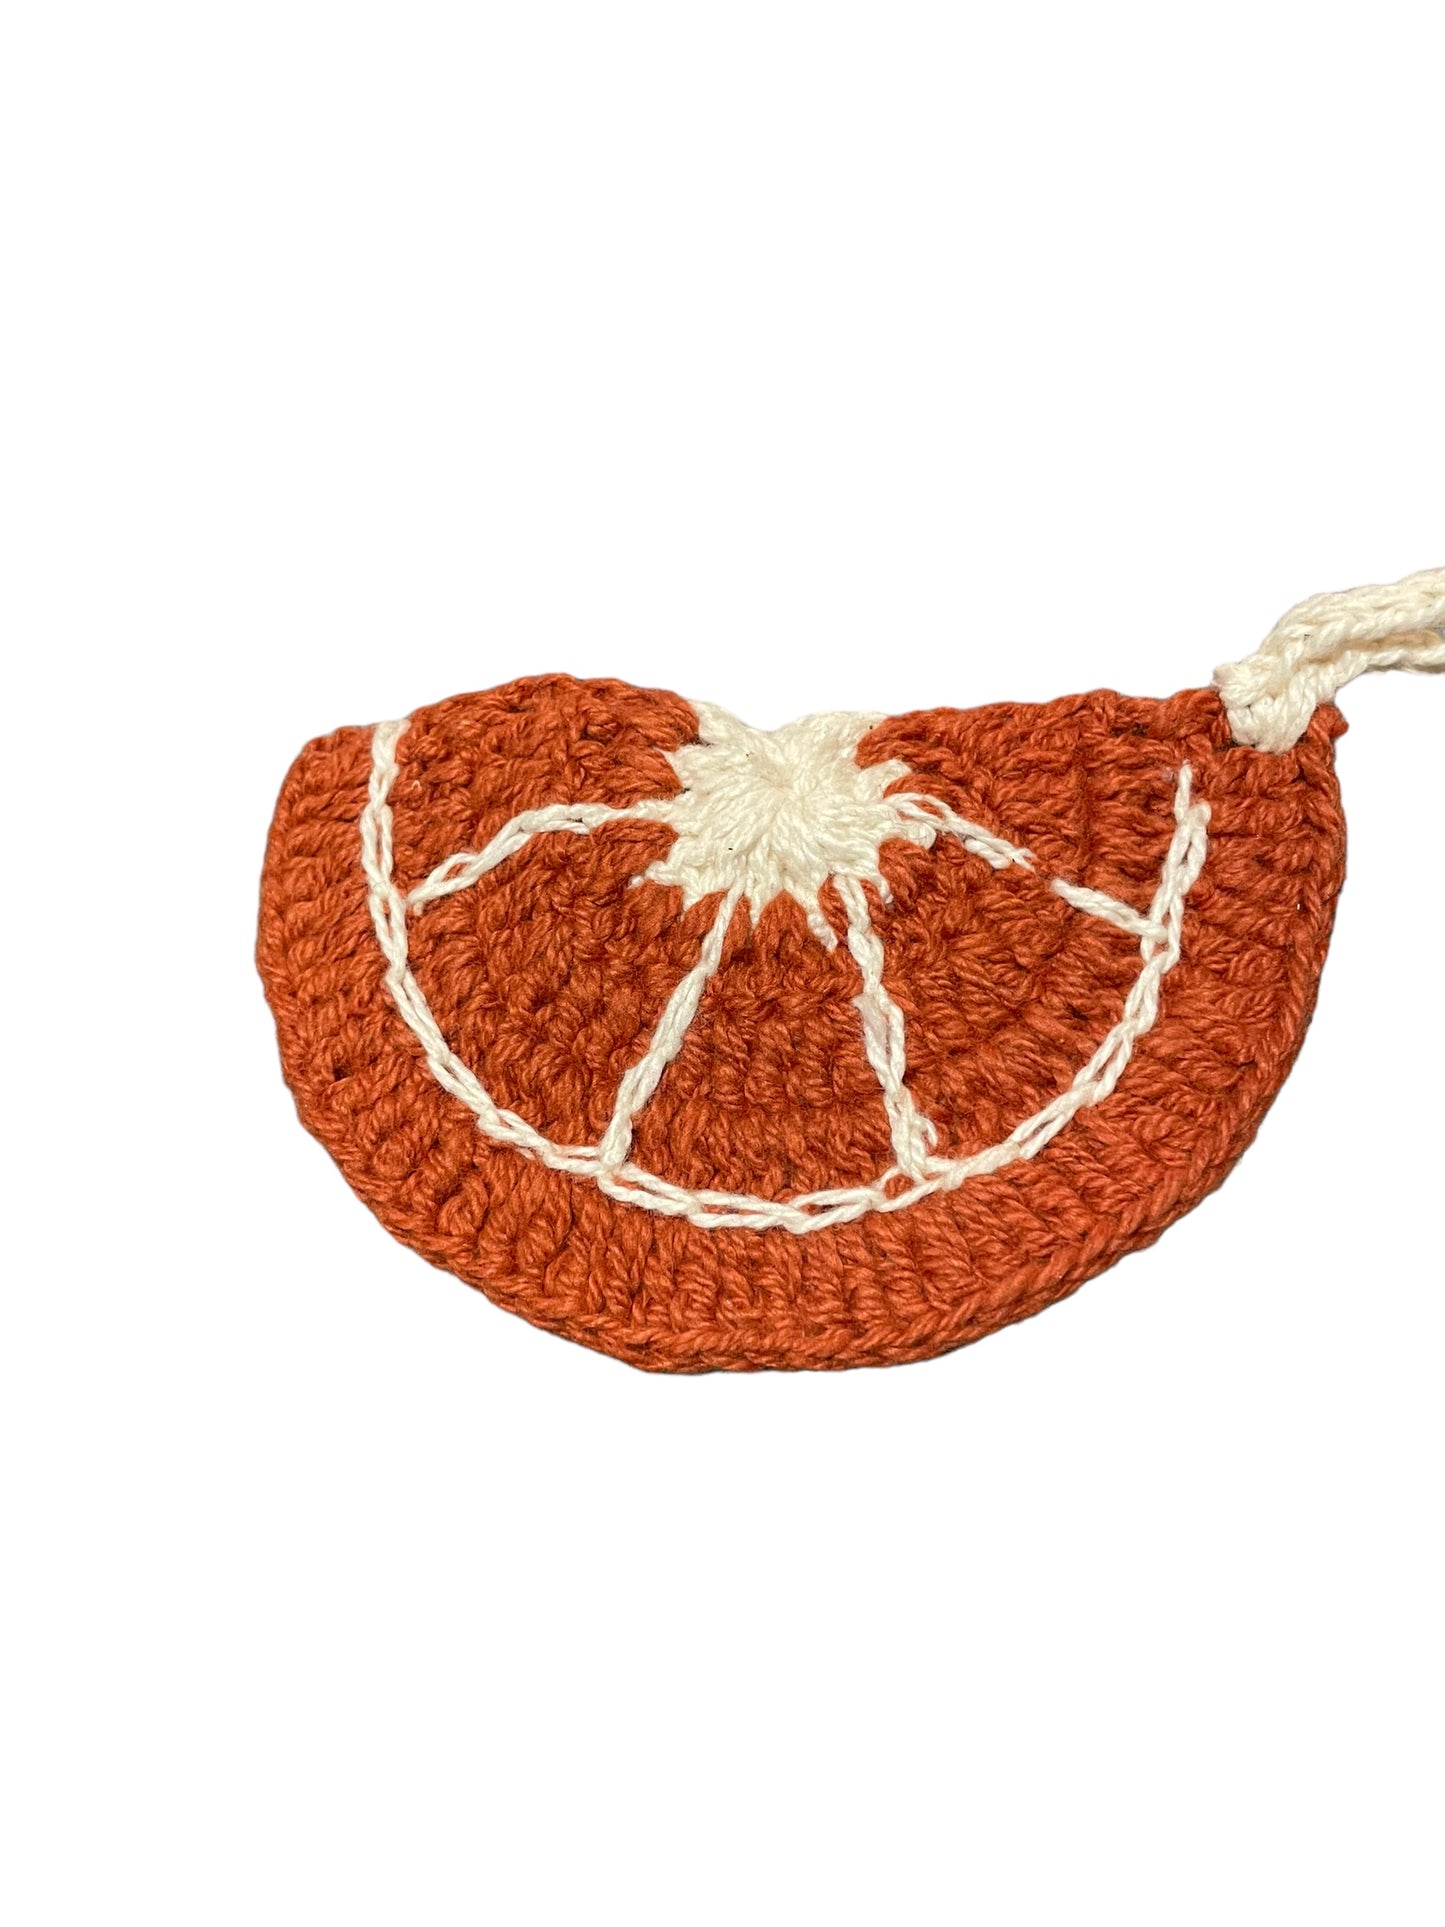 Cotton Crocheted Fruit Shaped Dish Scrubber w/ Loop, 4 Styles